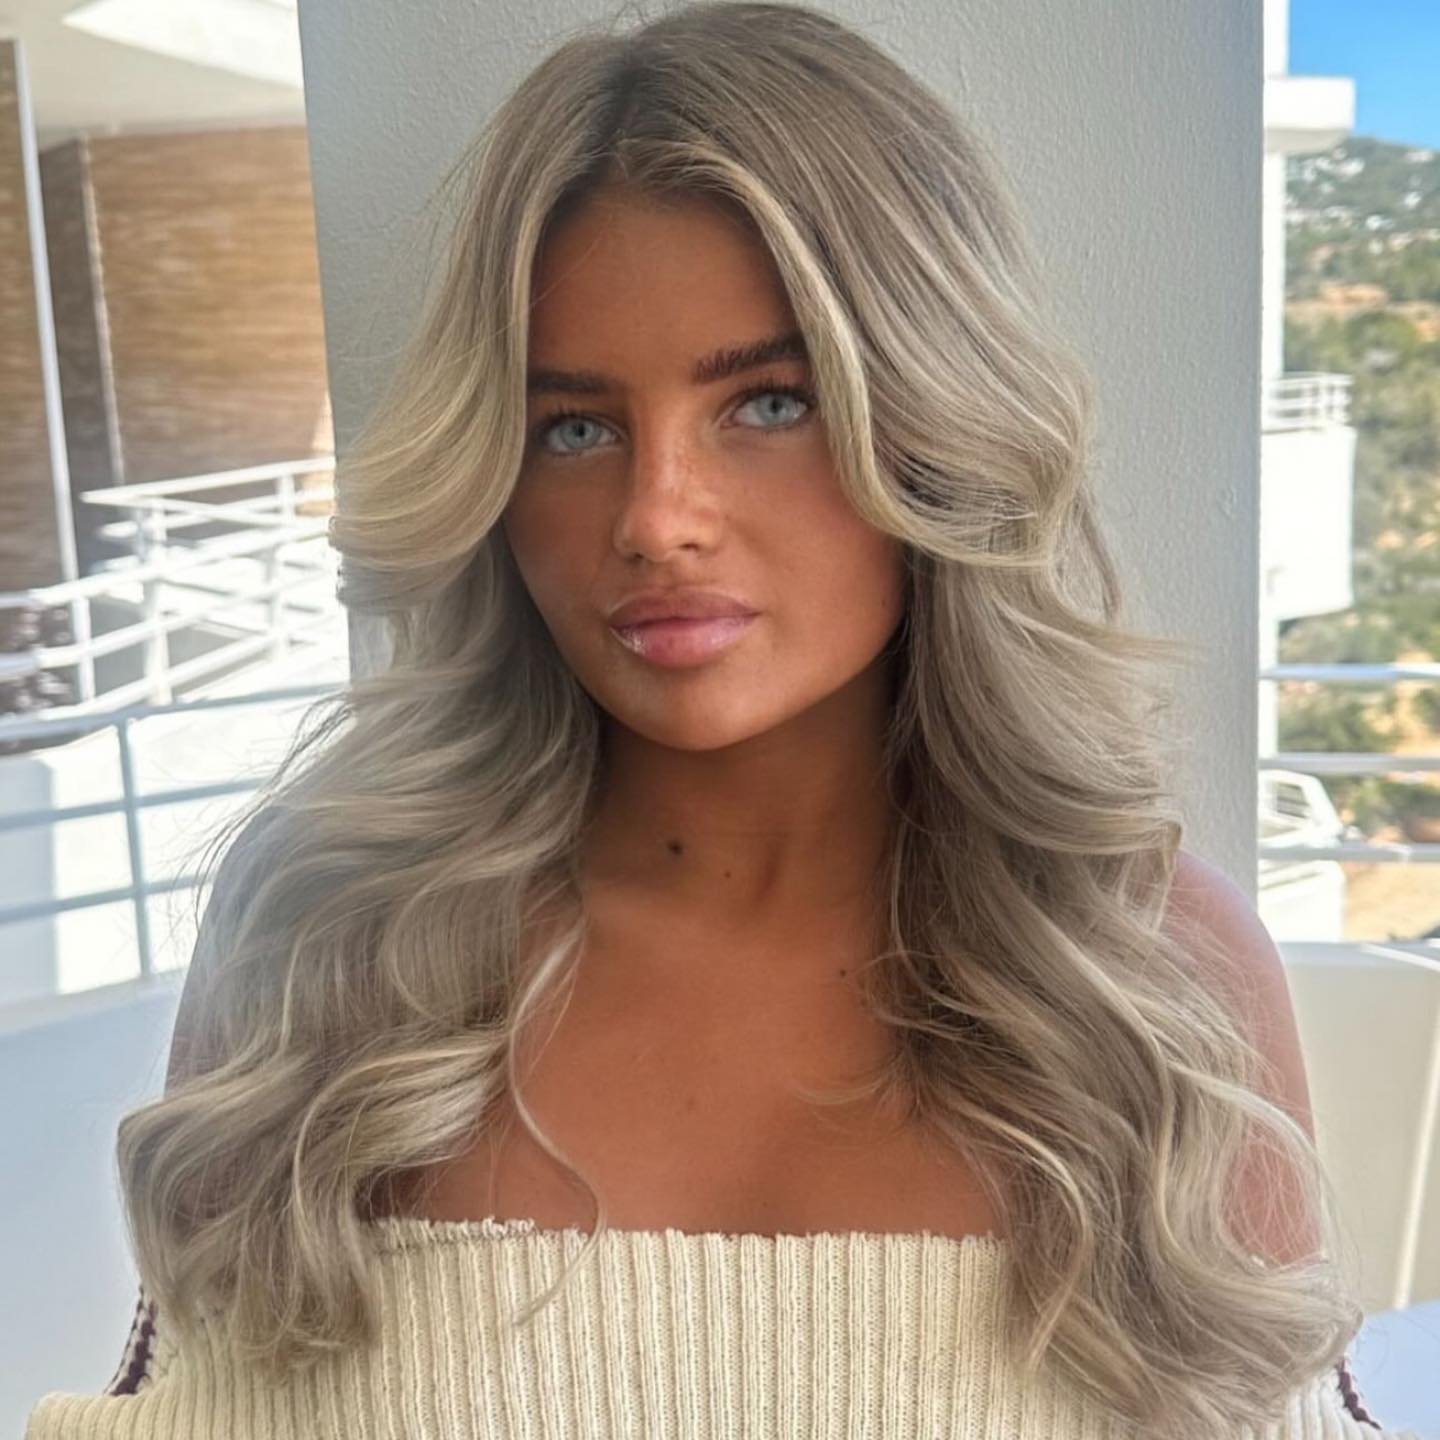 Waves for the beautiful @miawoodhall  thanks for booking our hair services 🌵🪩✨ have a ball in Obeach 

#ibiza #ibizahair #ibizahairdresser #ibizahairstylist #obeach